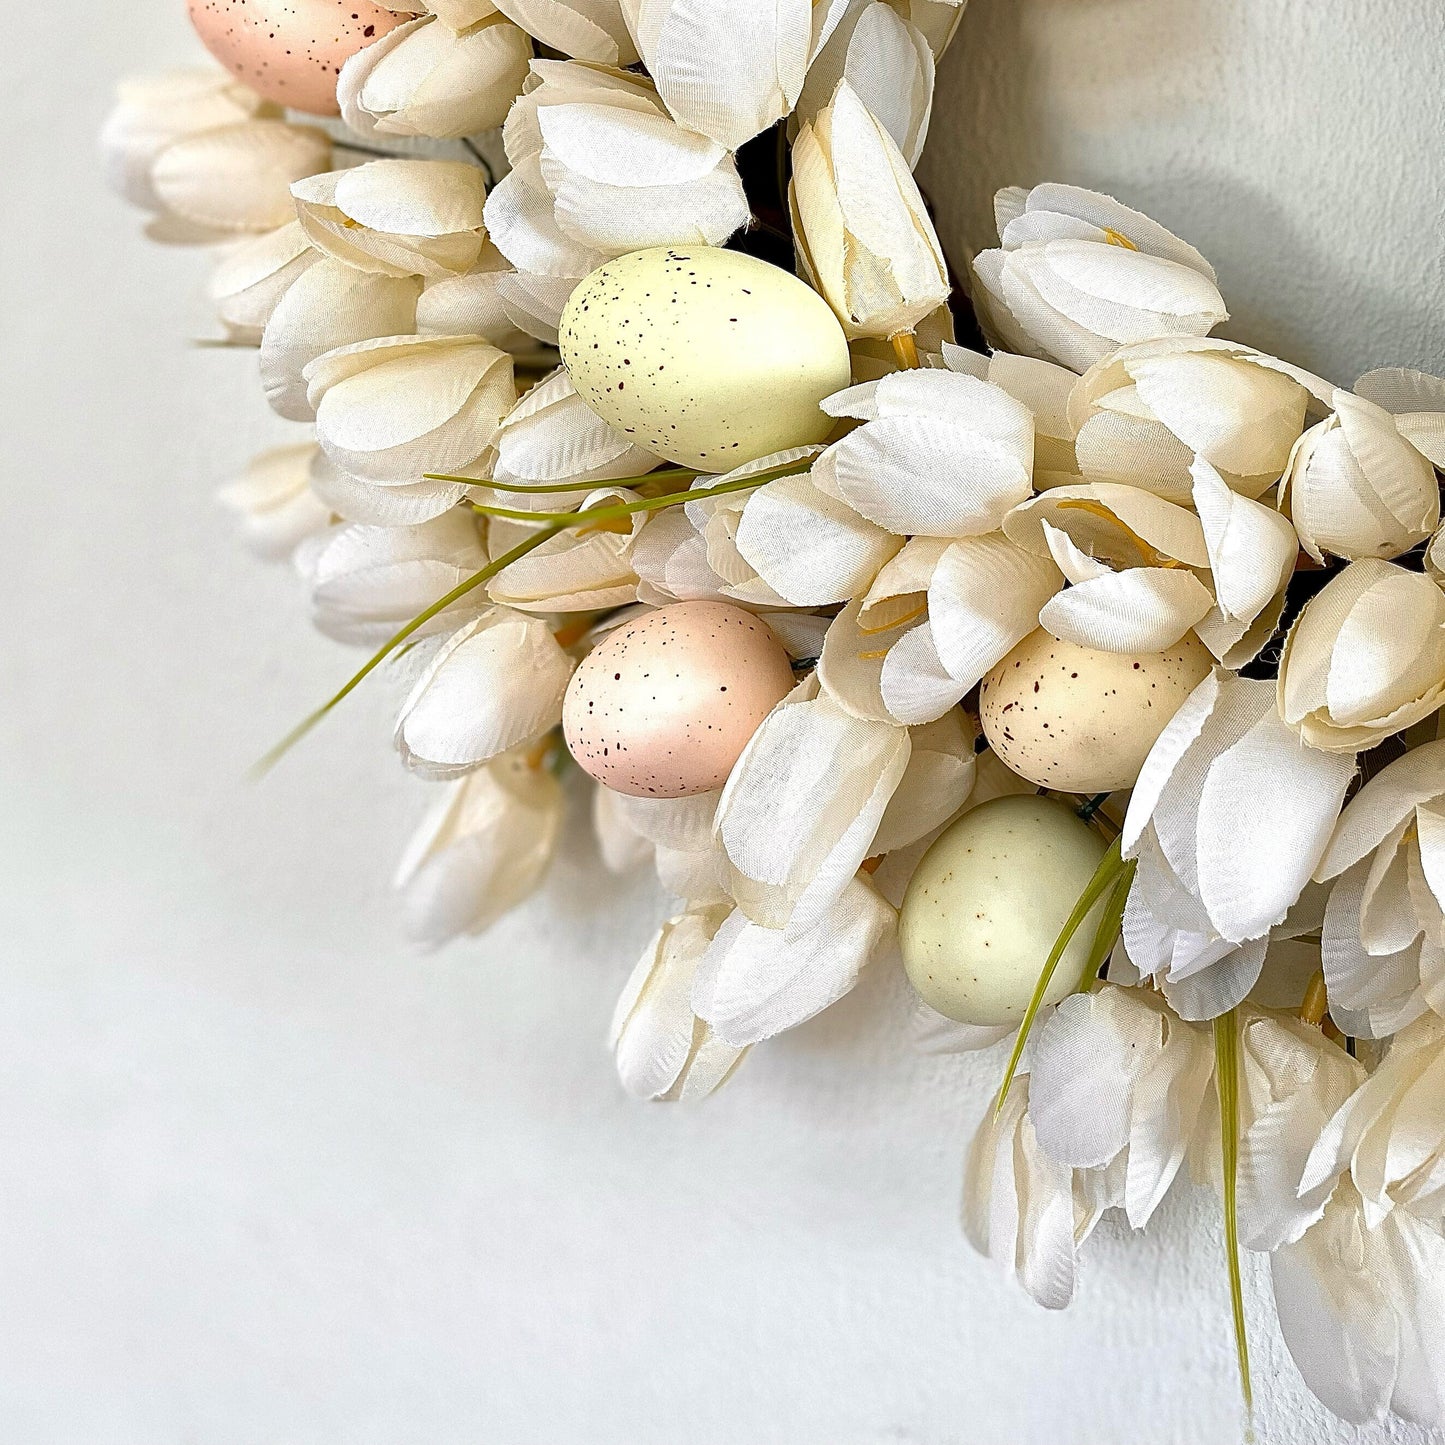 Spring Tulip Wreath with Speckled Eggs, Easter Wreath for Front Door, Artificial Flower Wreath with Pink, Blue, & Green Eggs, Indoor Wreath